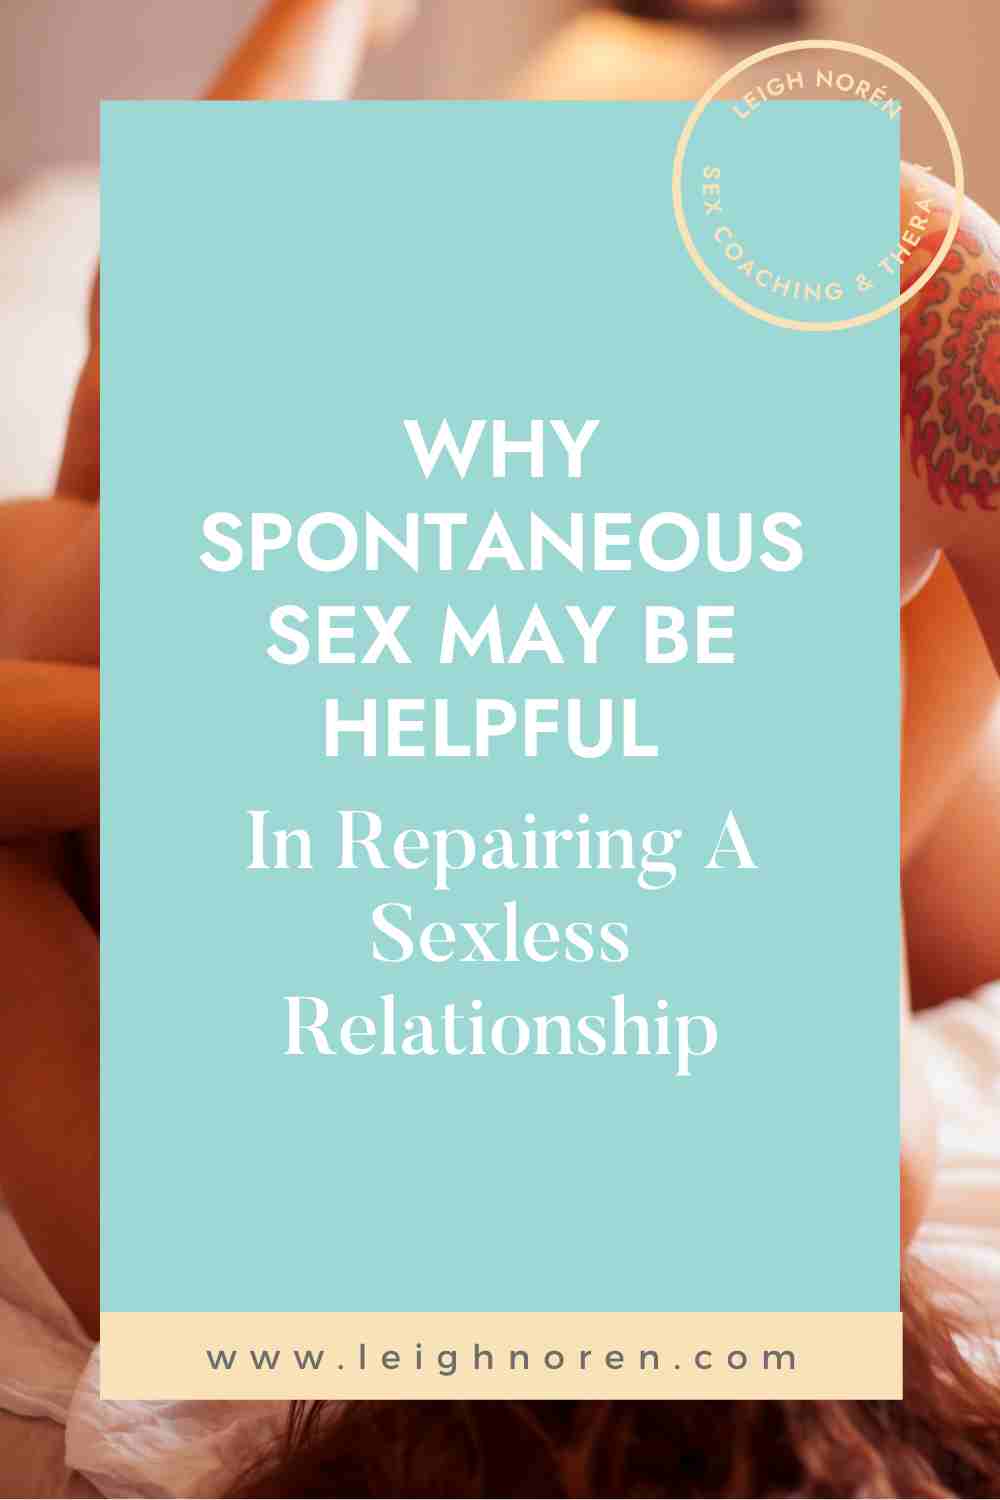 Why Spontaneous Sex May Be Helpful In Repairing A Sexless Relationship